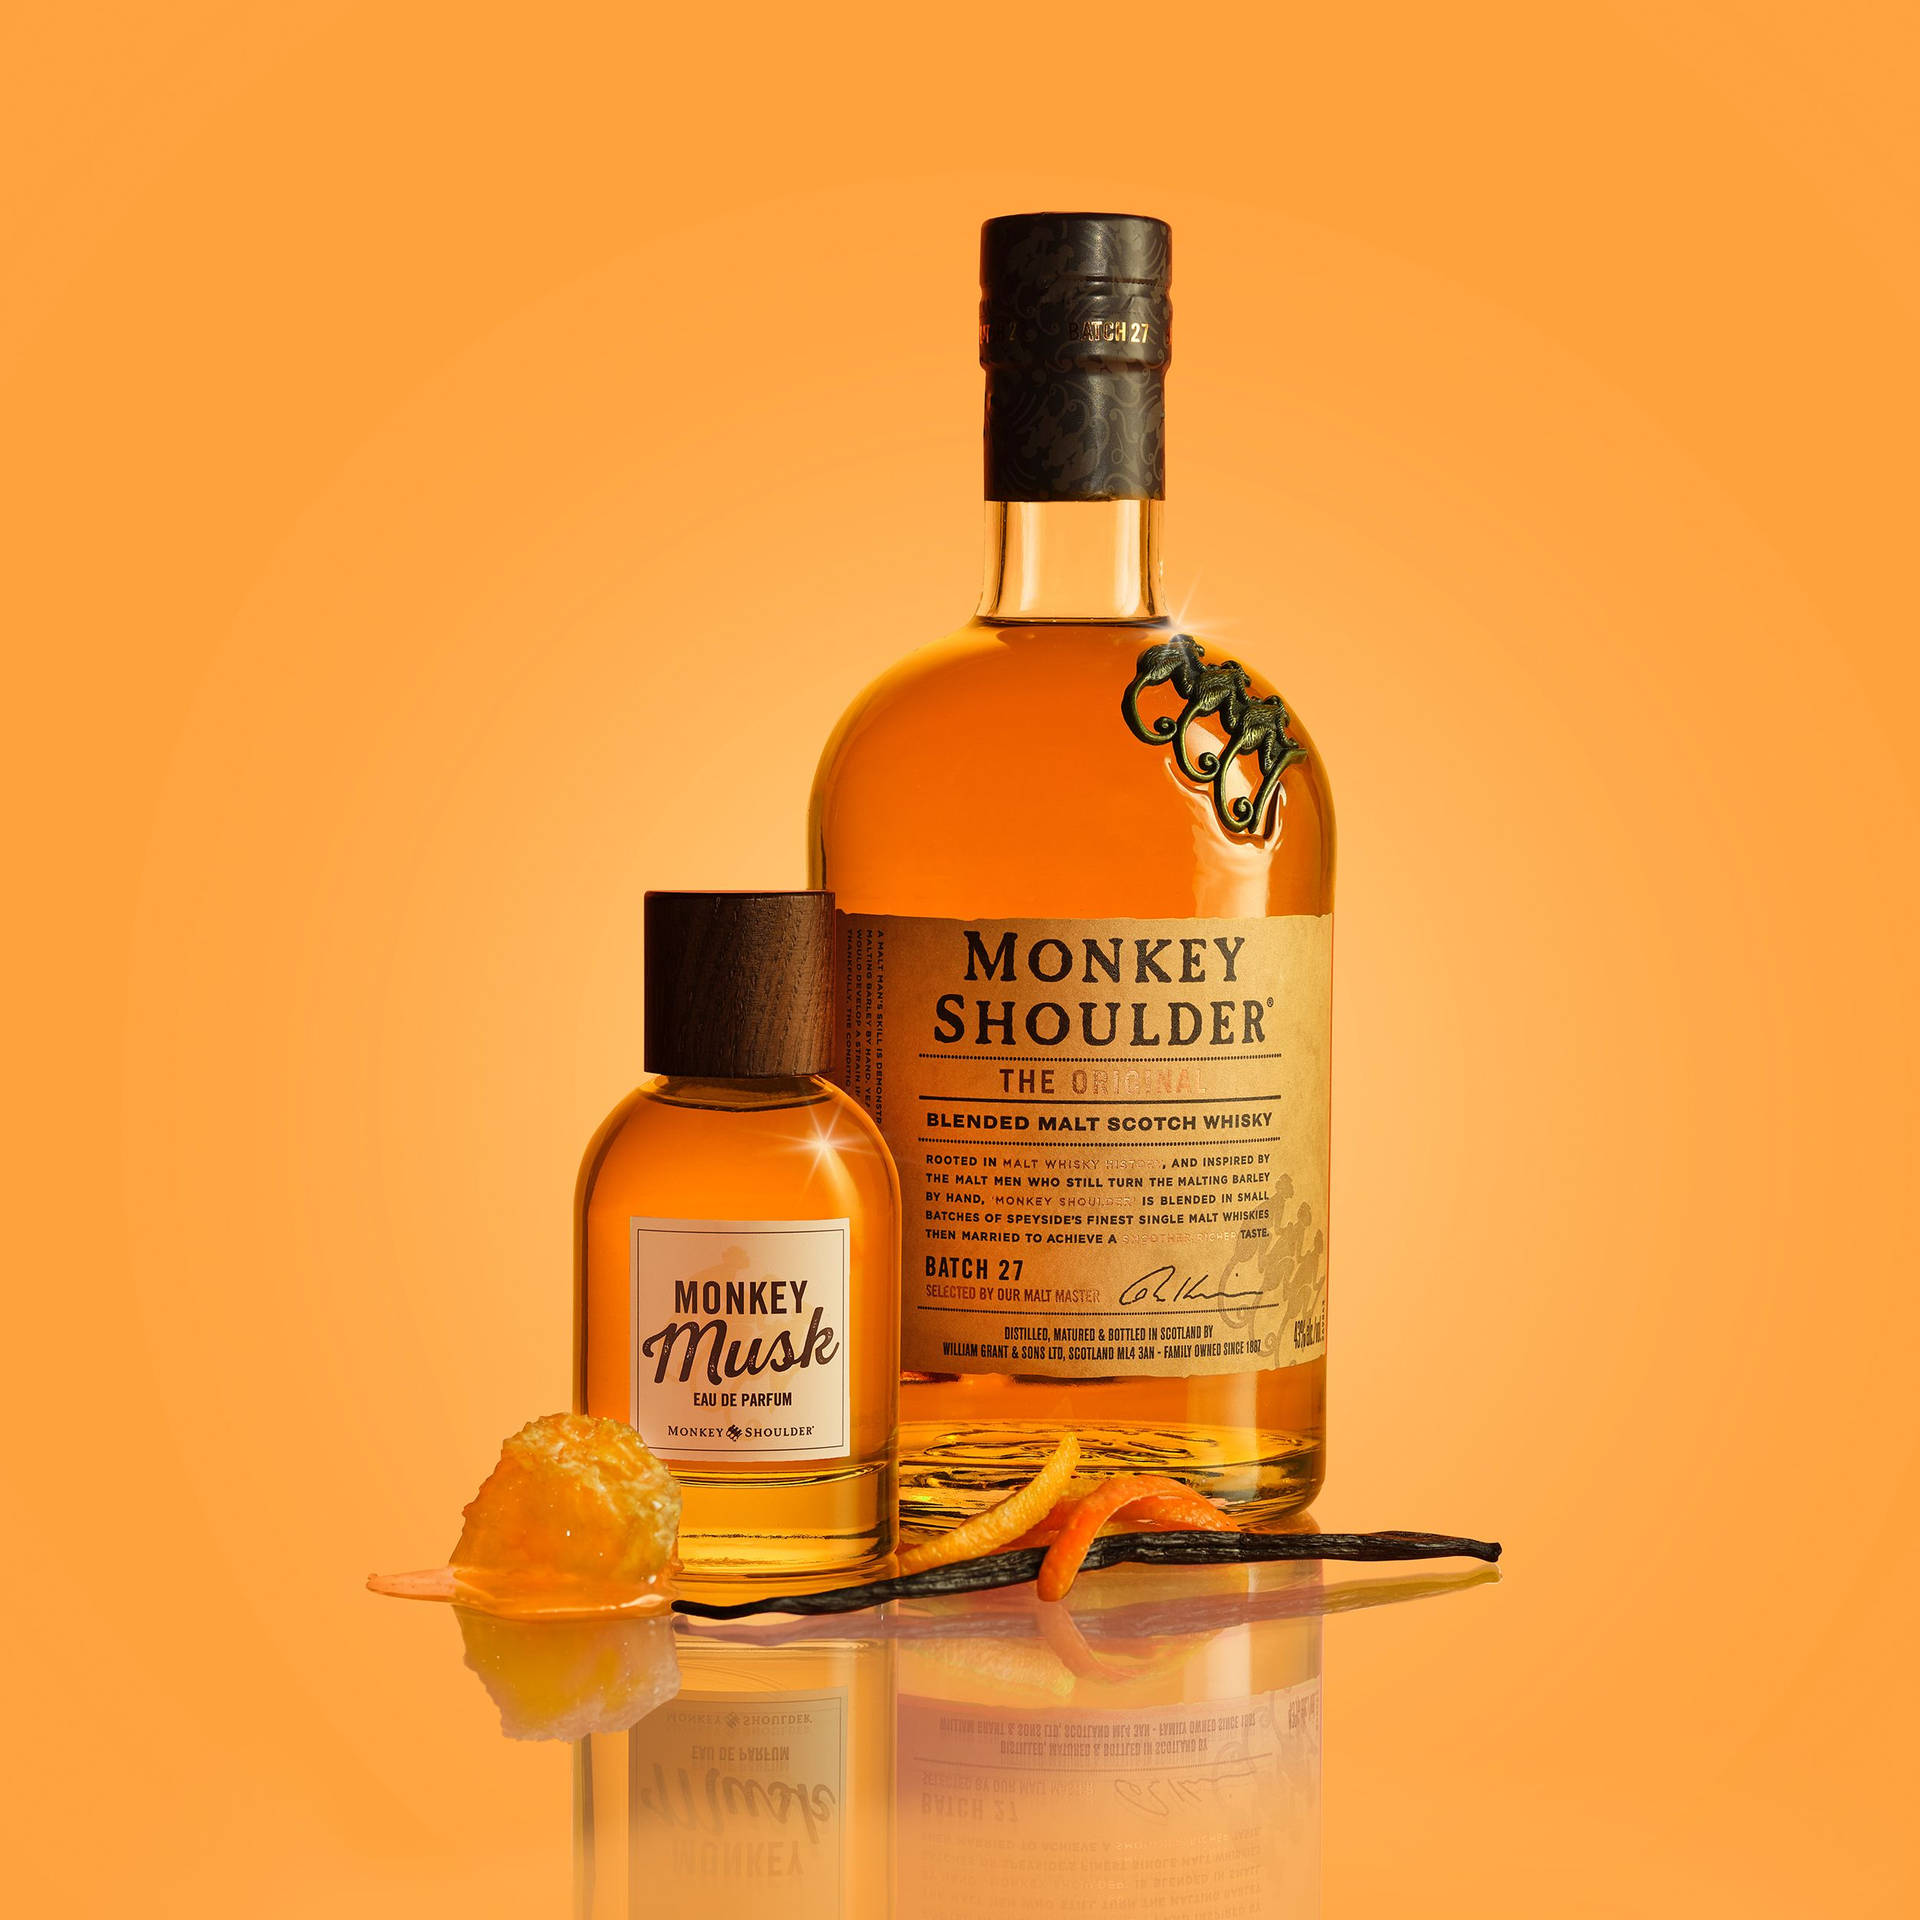 "An exceptional taste of Monkey Shoulder whiskey" Wallpaper